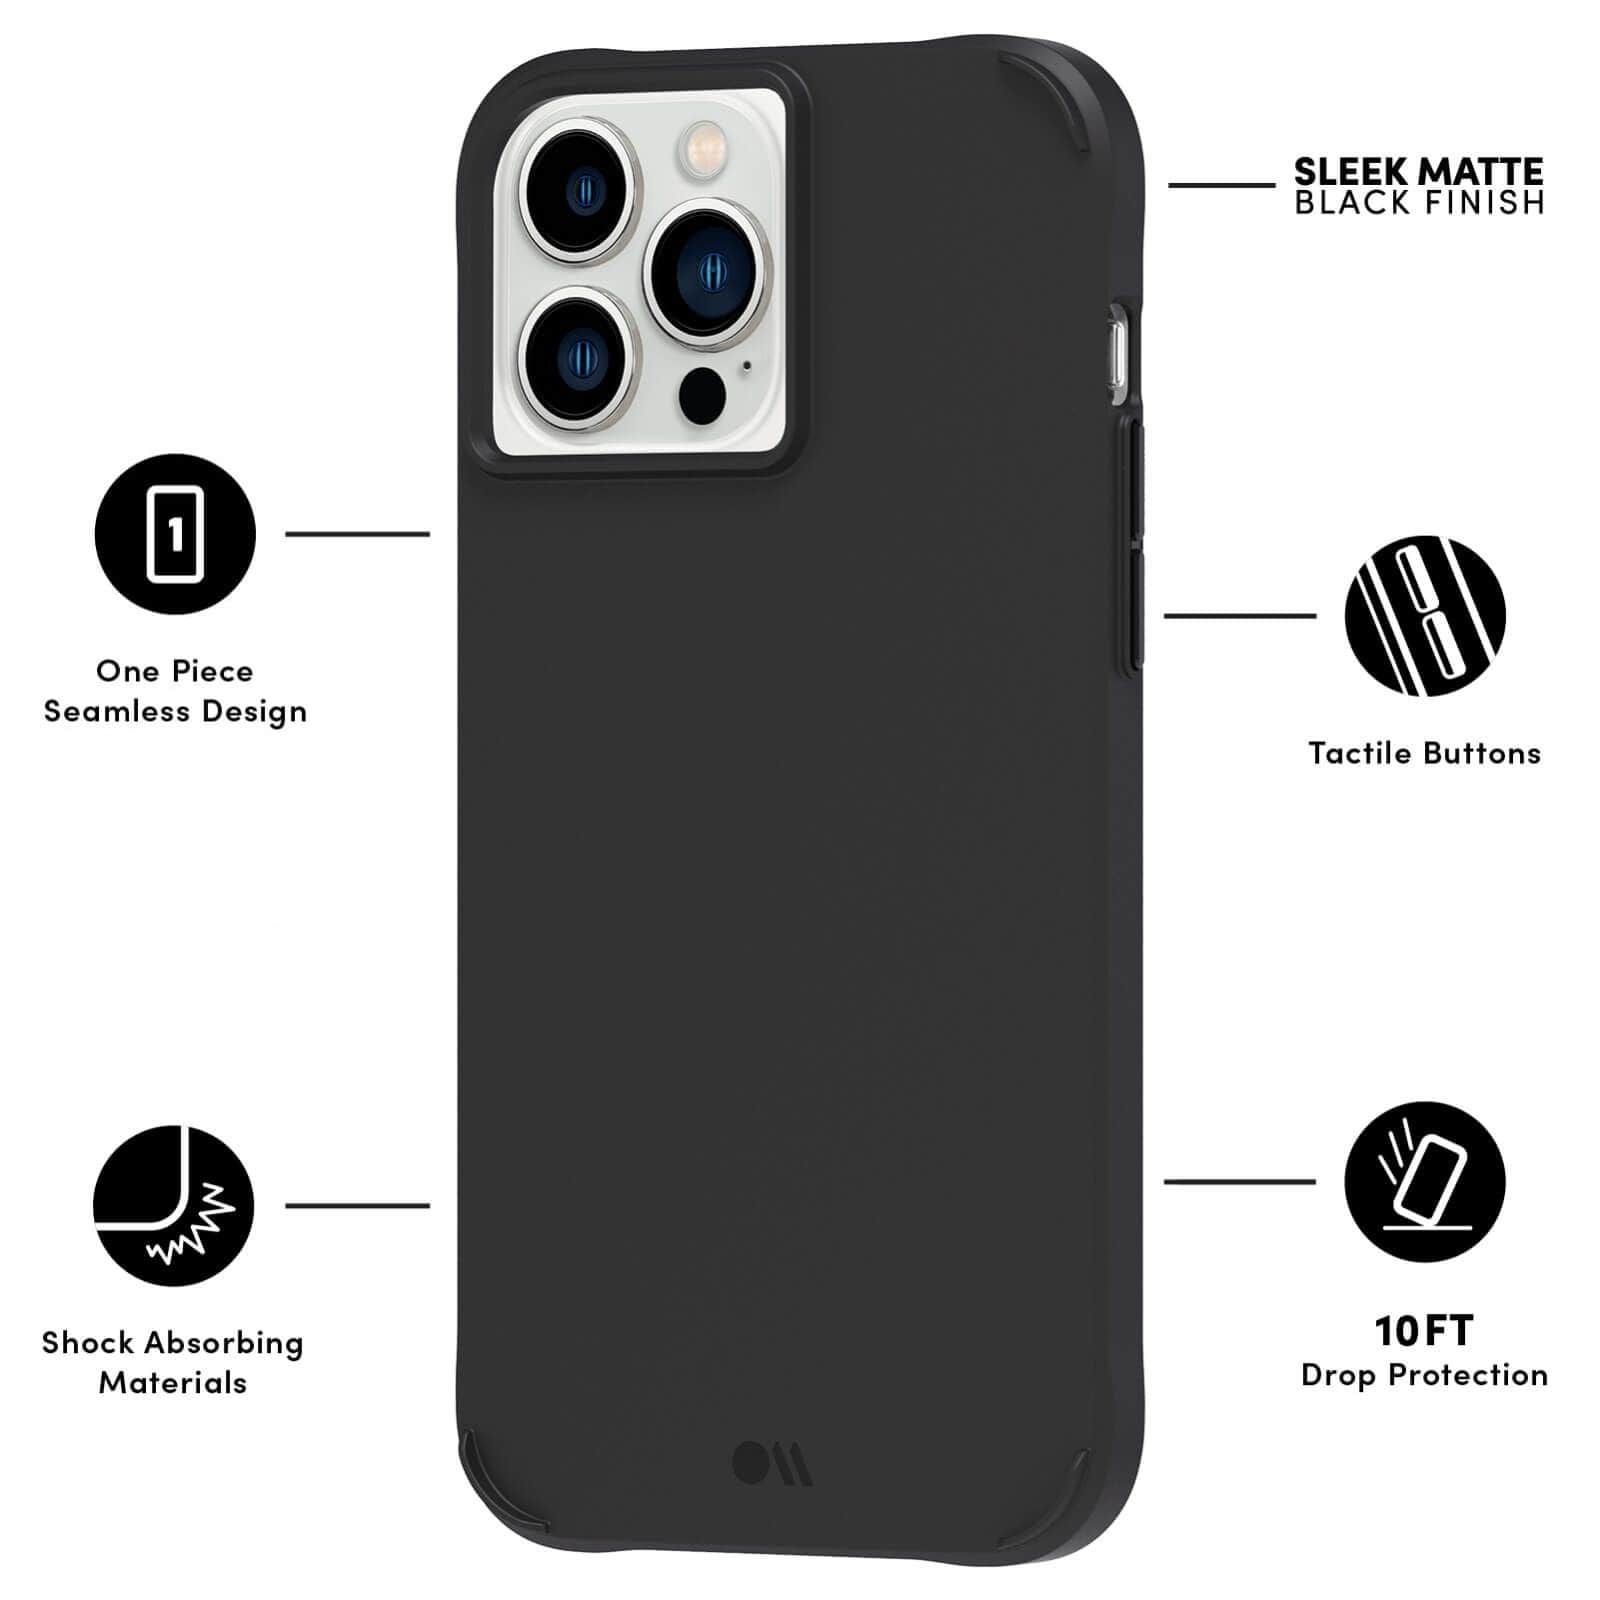 FEATURES ONE PIECE SEAMLESS DESIGN, SHOCK ABSORBING MATERIALS, SLEEK MATTE BLACK FINISH, TACTILE BUTTONS, 10 FT DROP PROTECTION. COLOR::BLACK